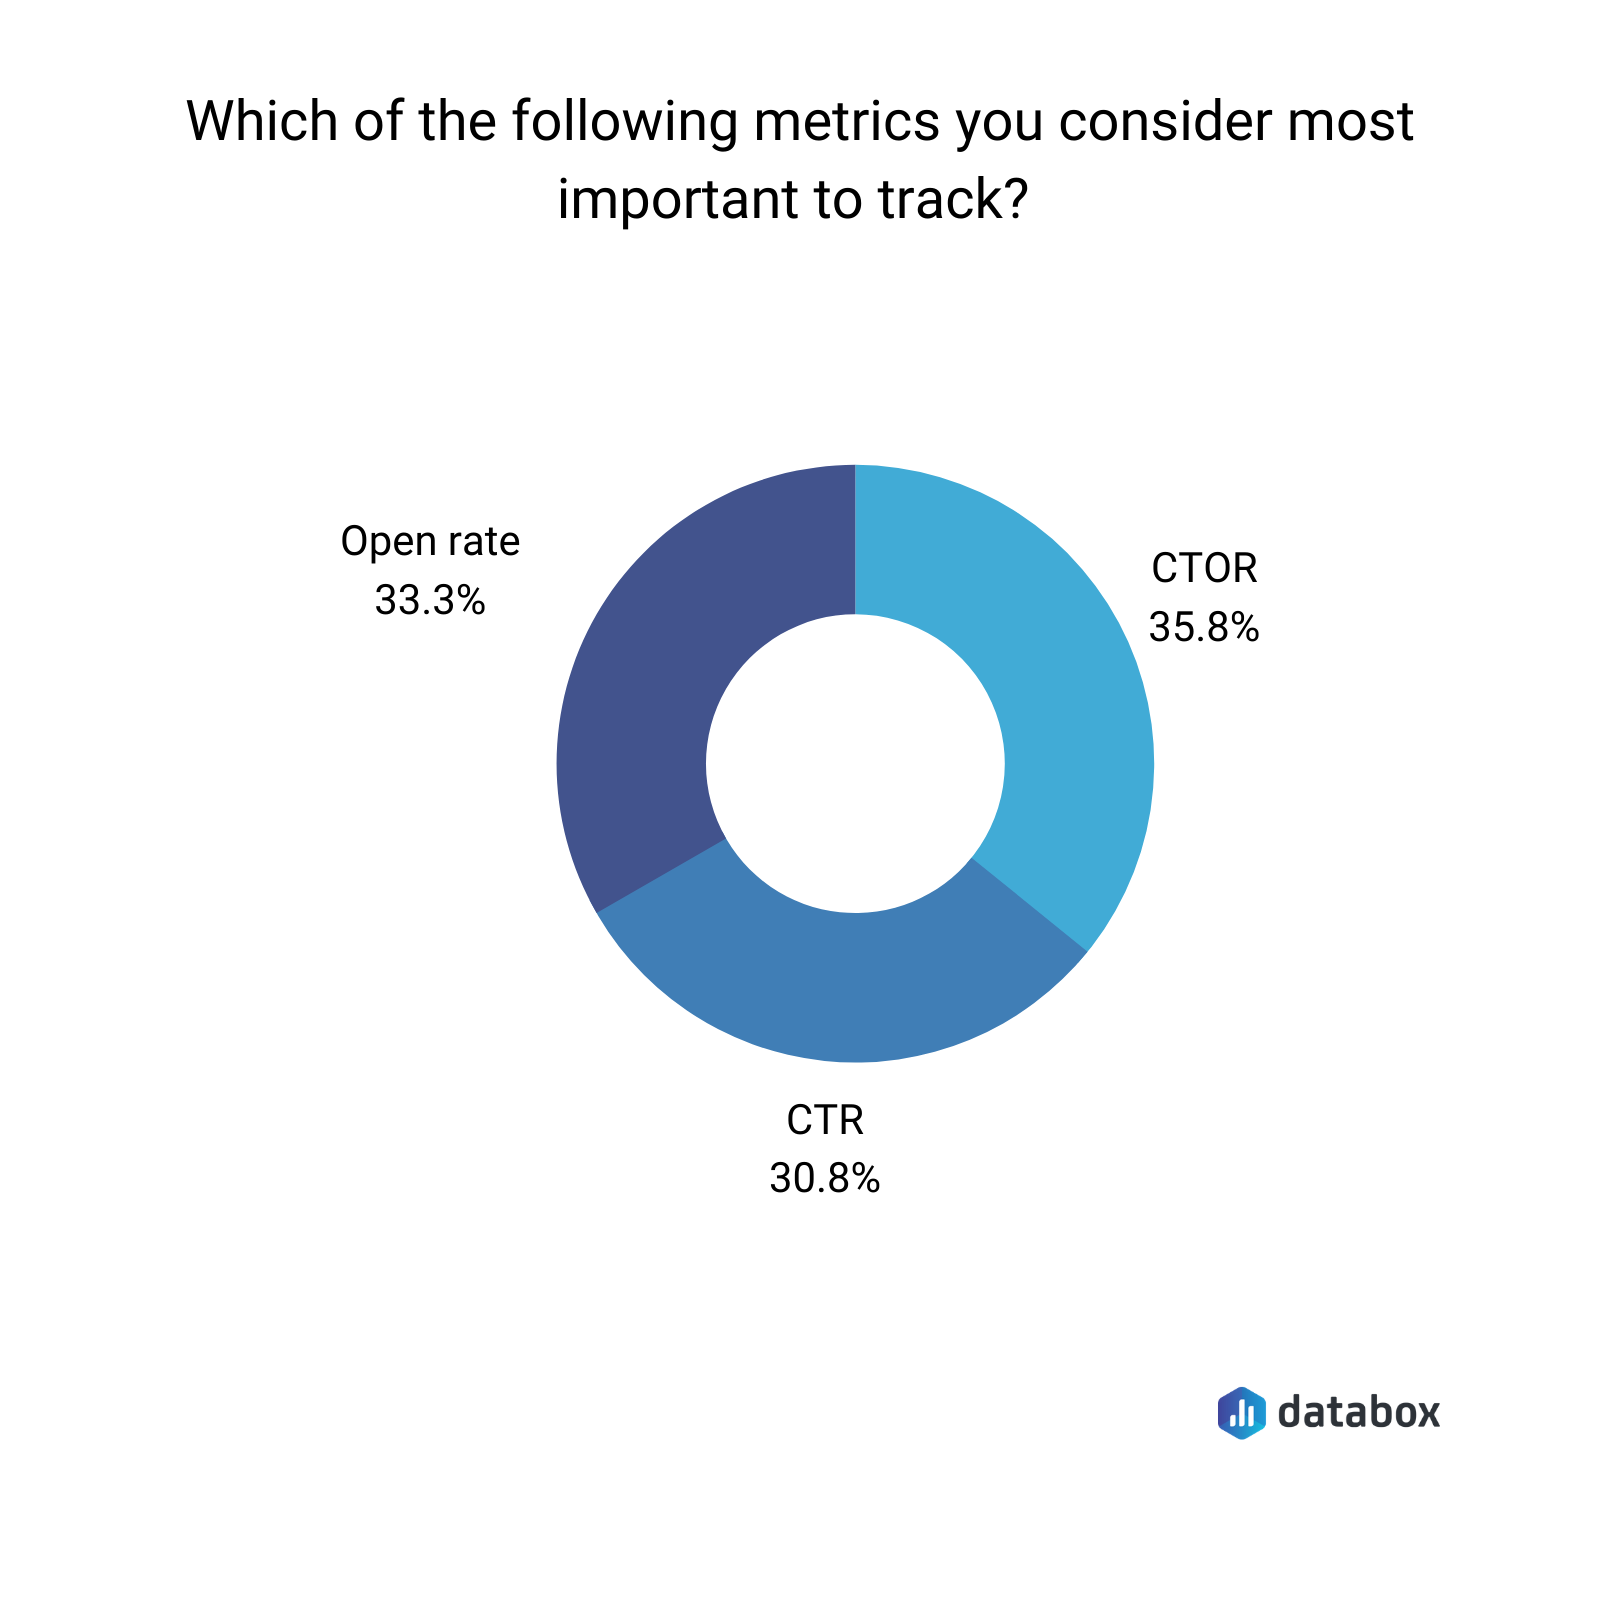 which of the following metrics you consider most important to track?